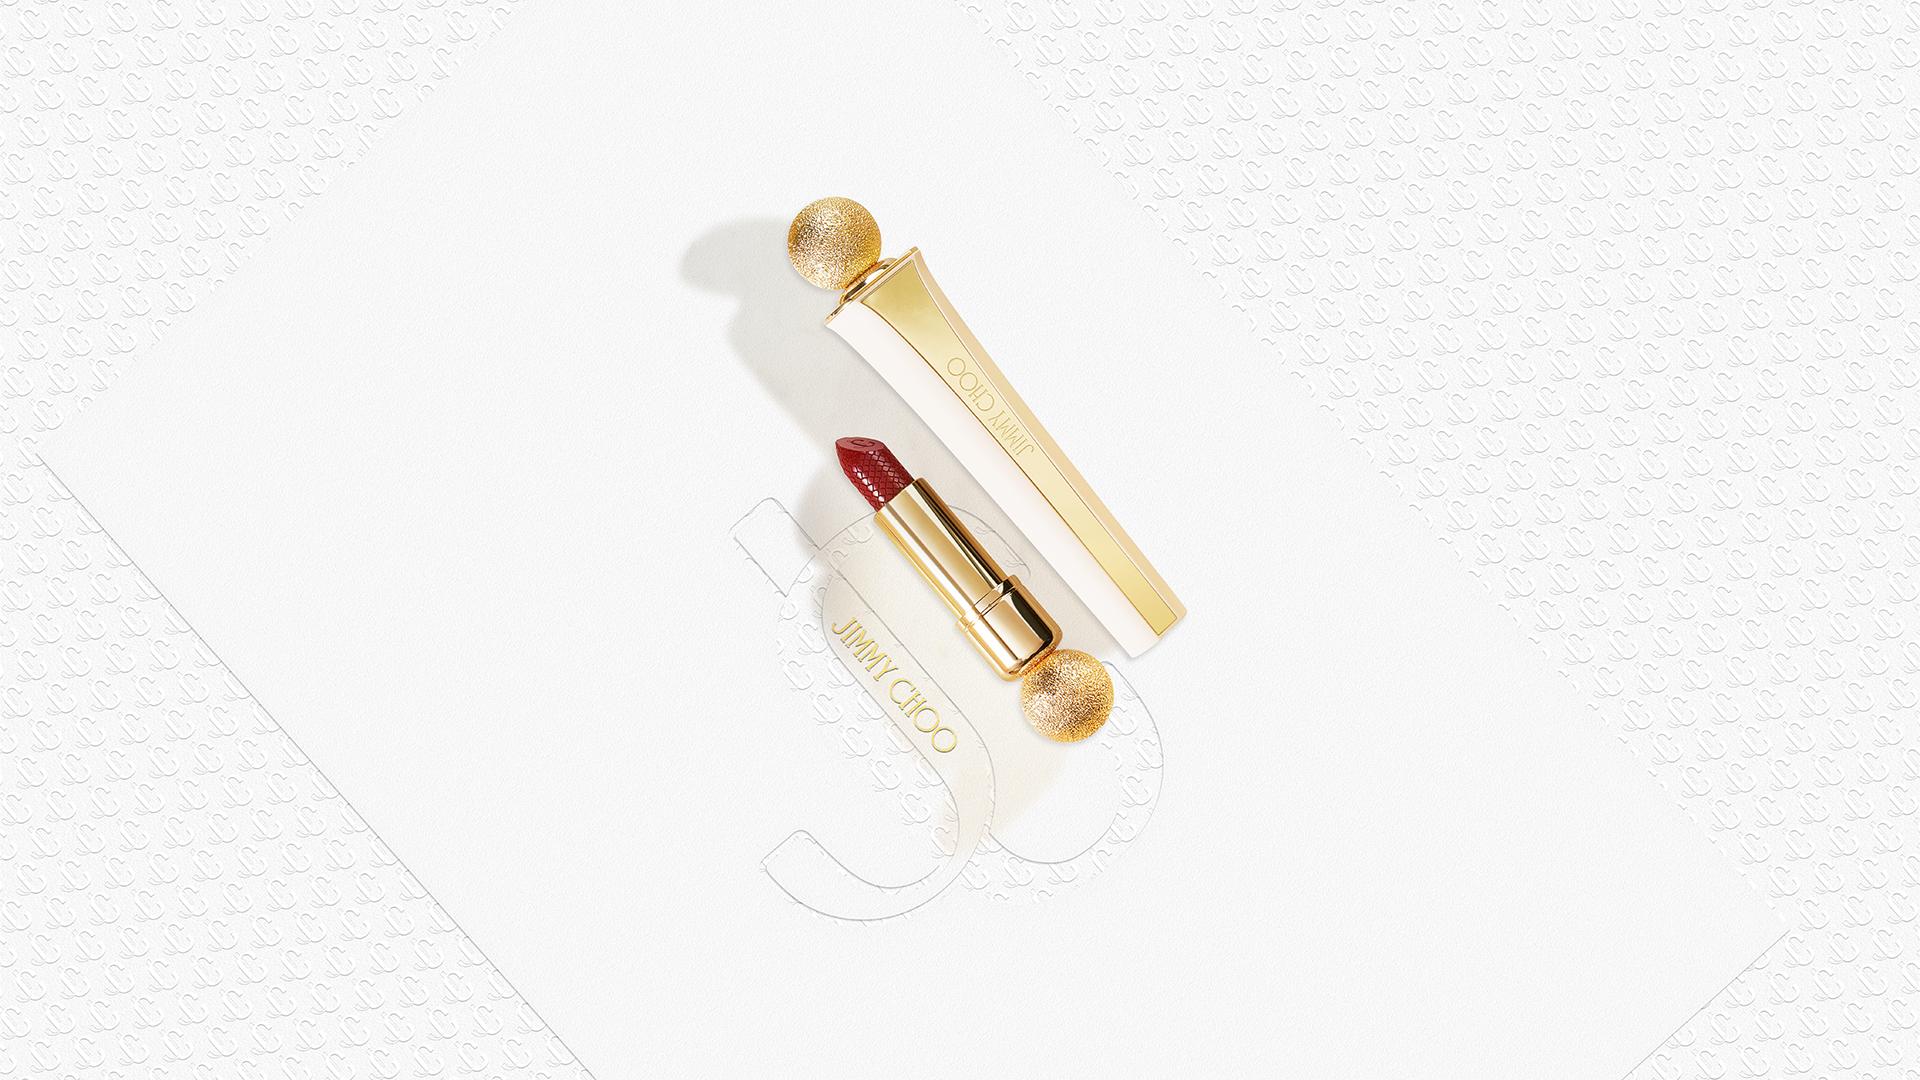 Mock-up of Jimmy Choo Lipstick from the seduction collection, red lipstick on branding paper